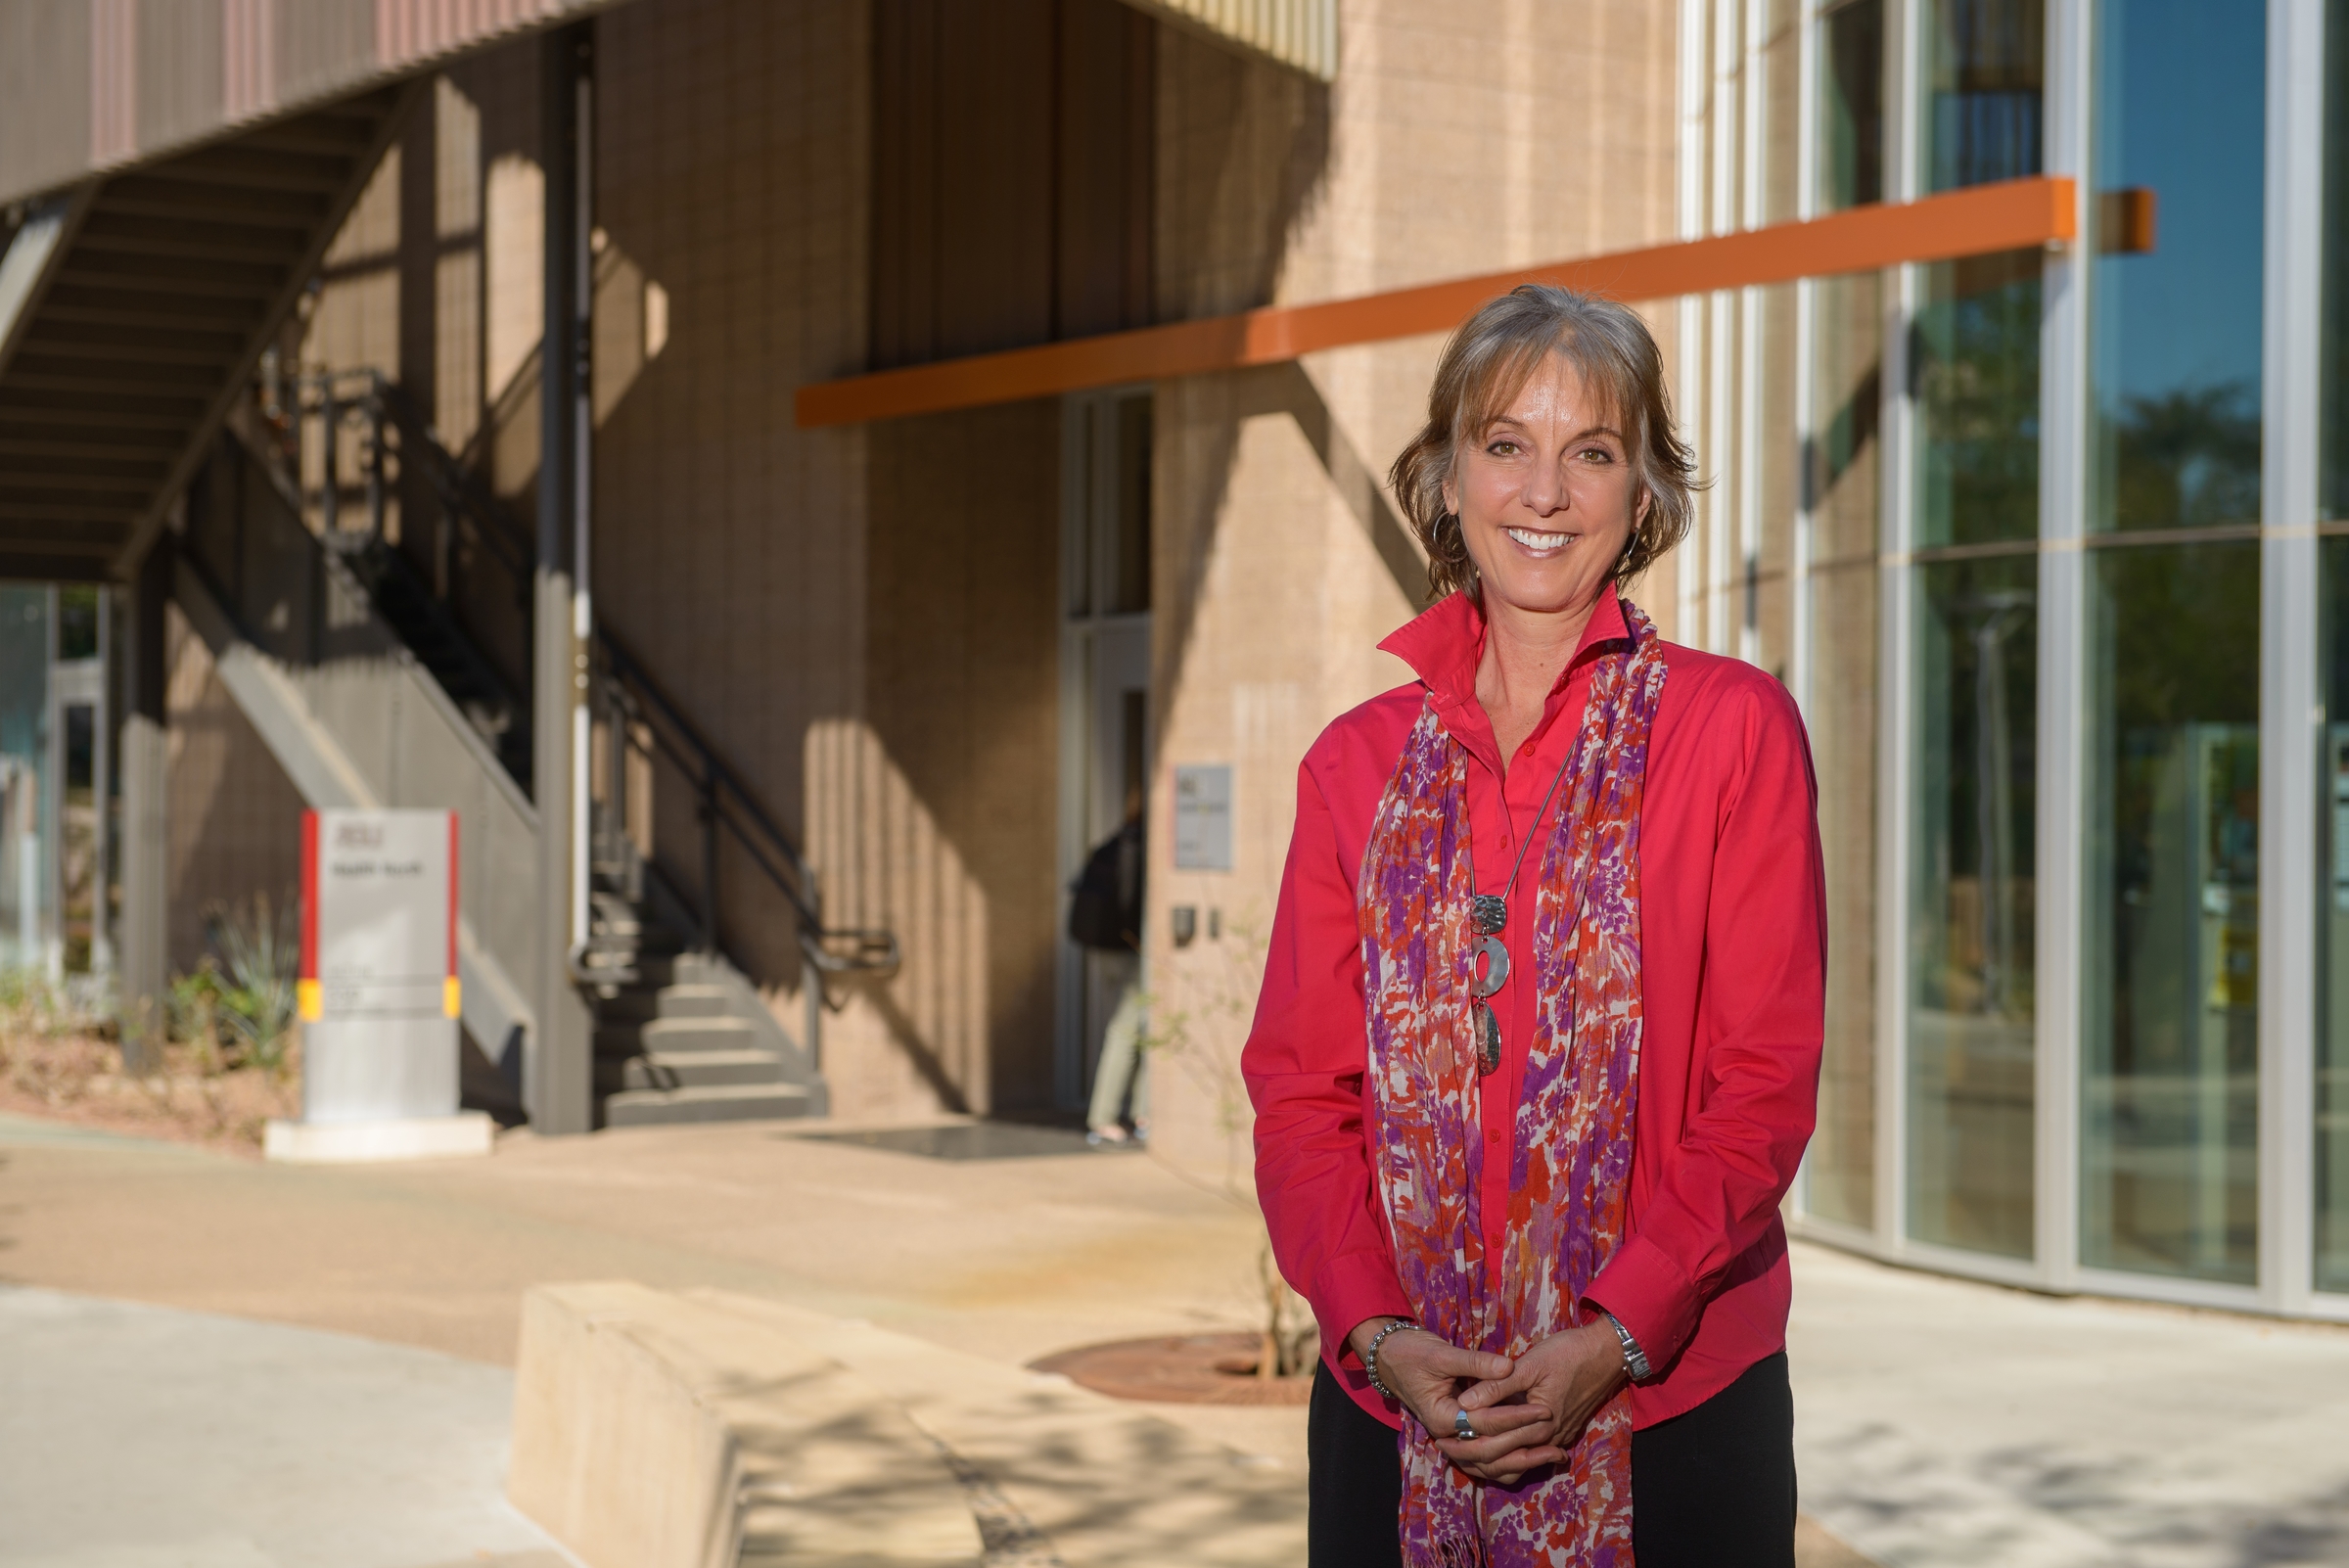 A photograph of Teri Pipe, ASU's first Chief WellBeing Officer